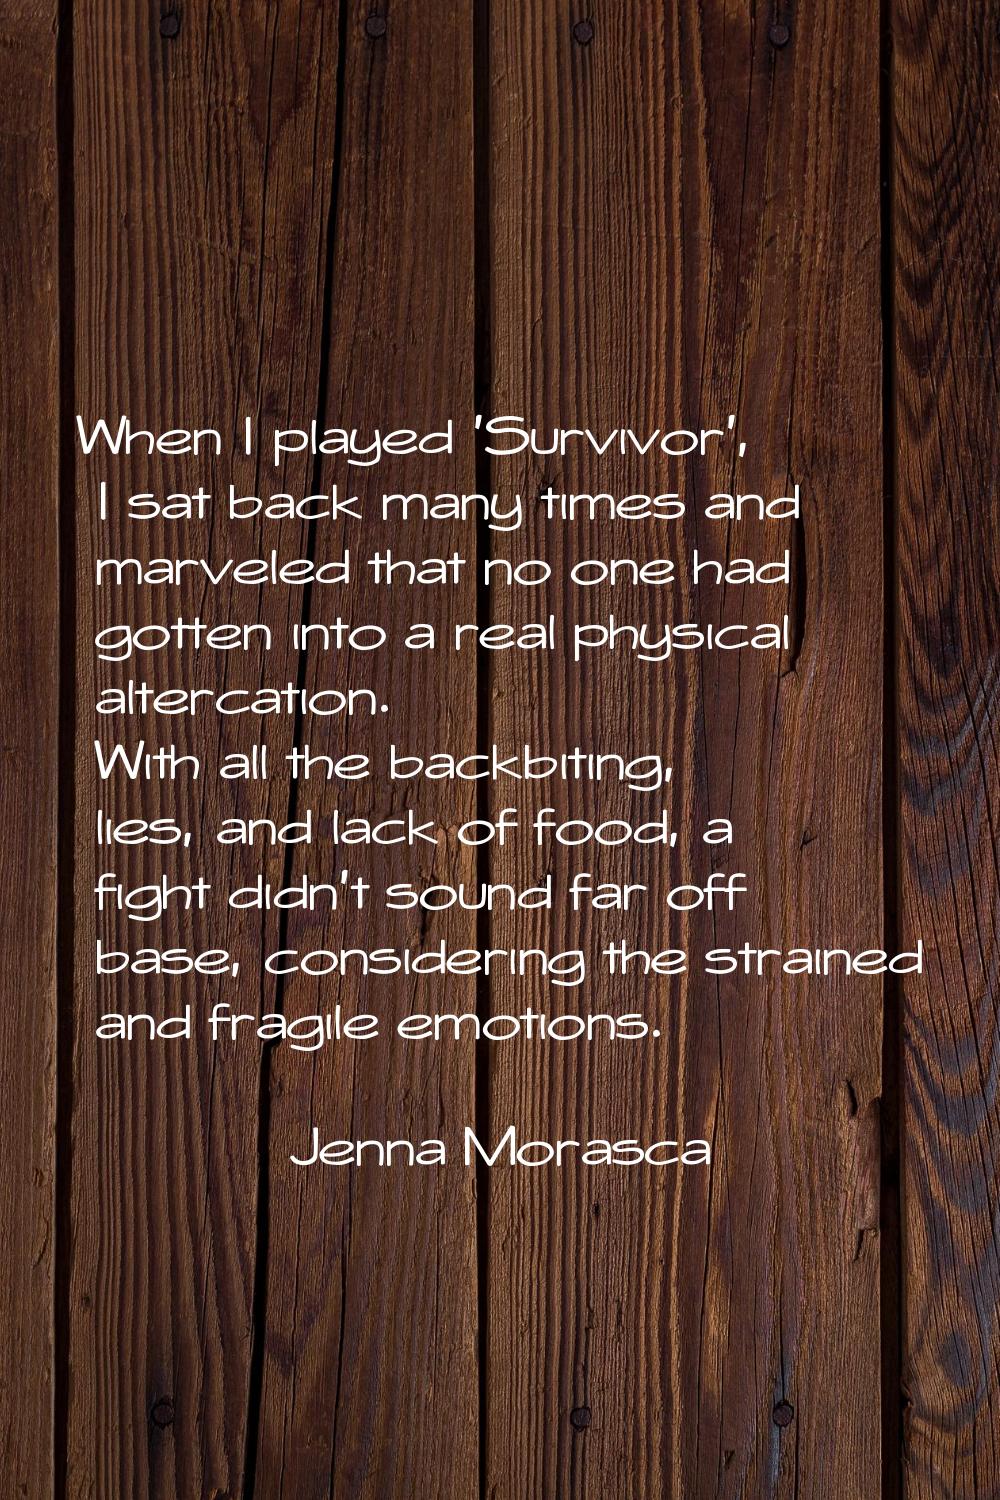 When I played 'Survivor', I sat back many times and marveled that no one had gotten into a real phy